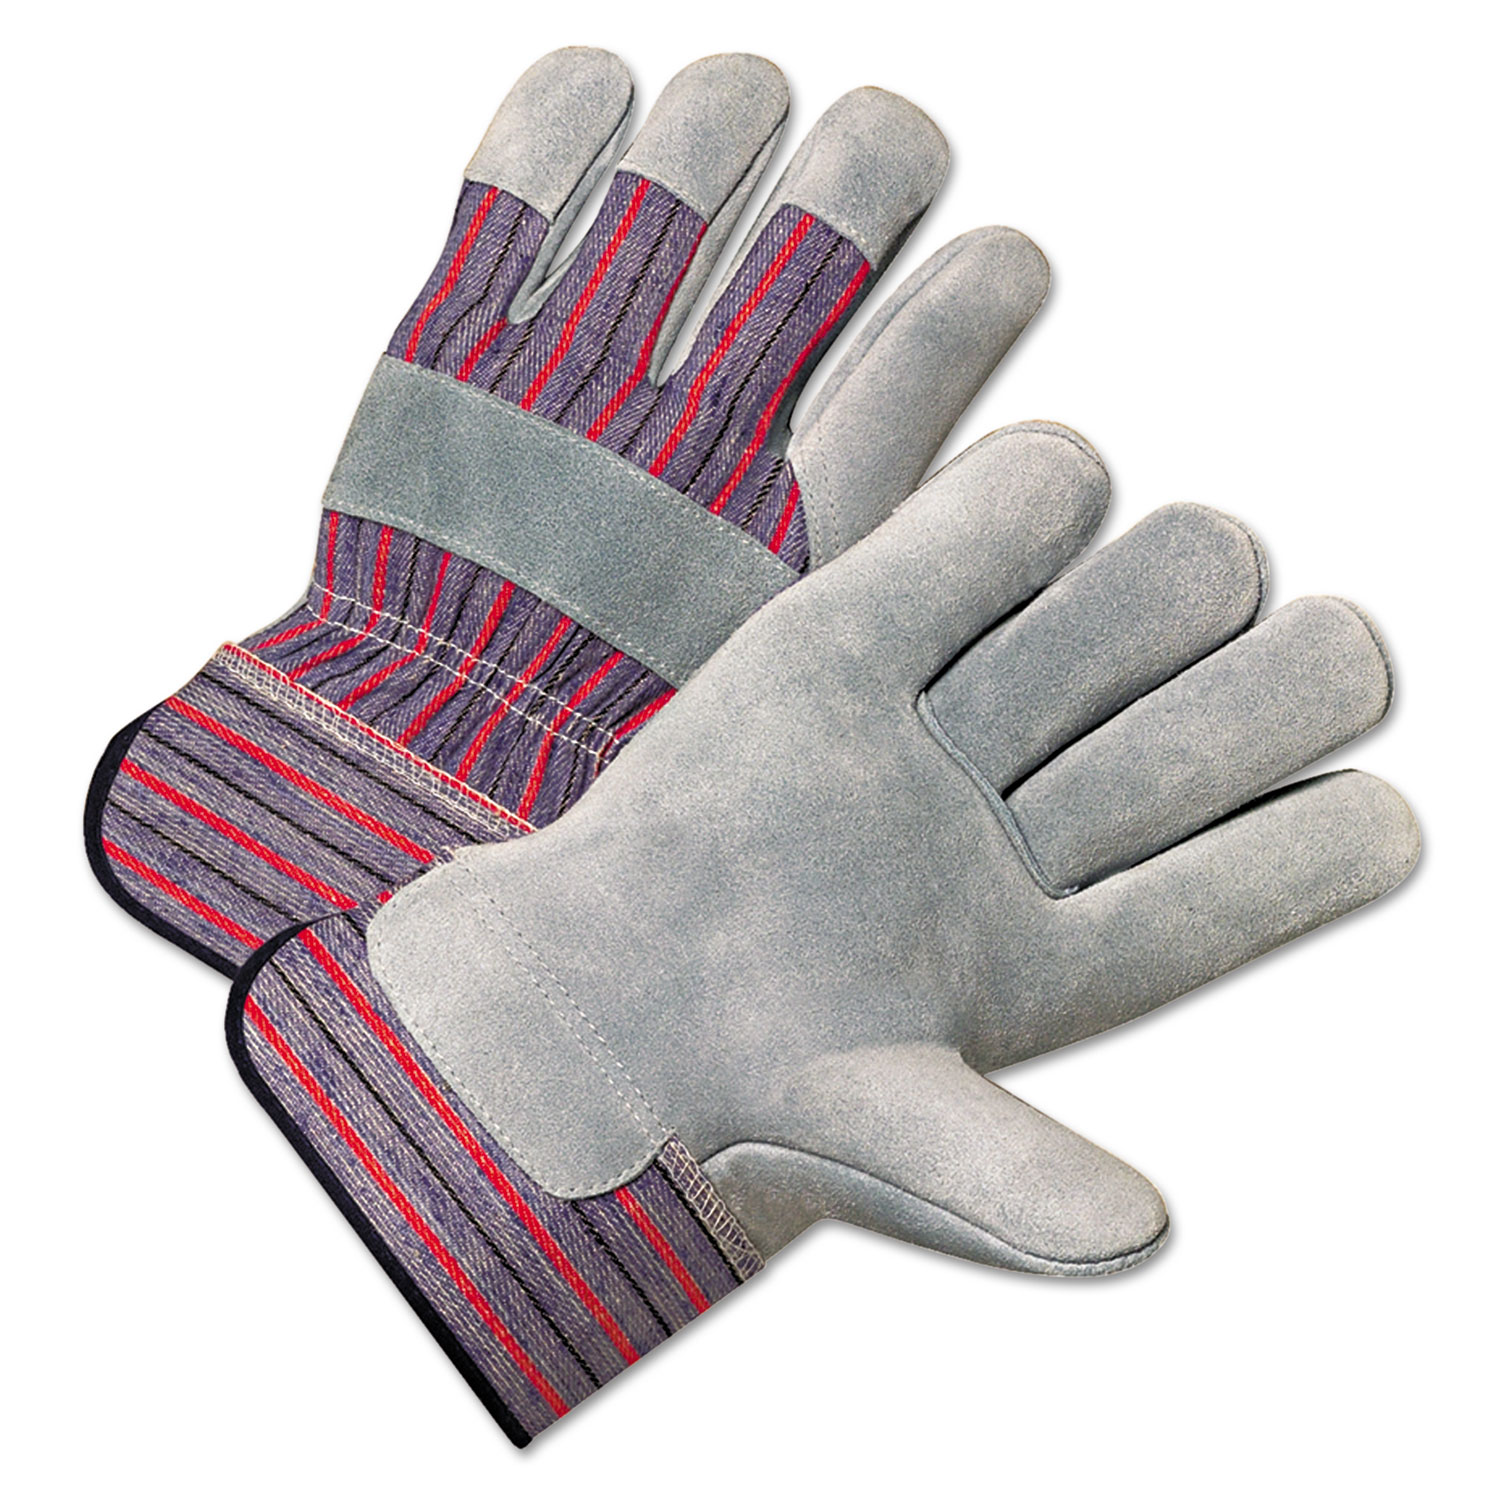  Anchor Brand 558 2000 Series Leather Palm Gloves, Gray/Red, Large, 12 Pairs (ANR2100) 